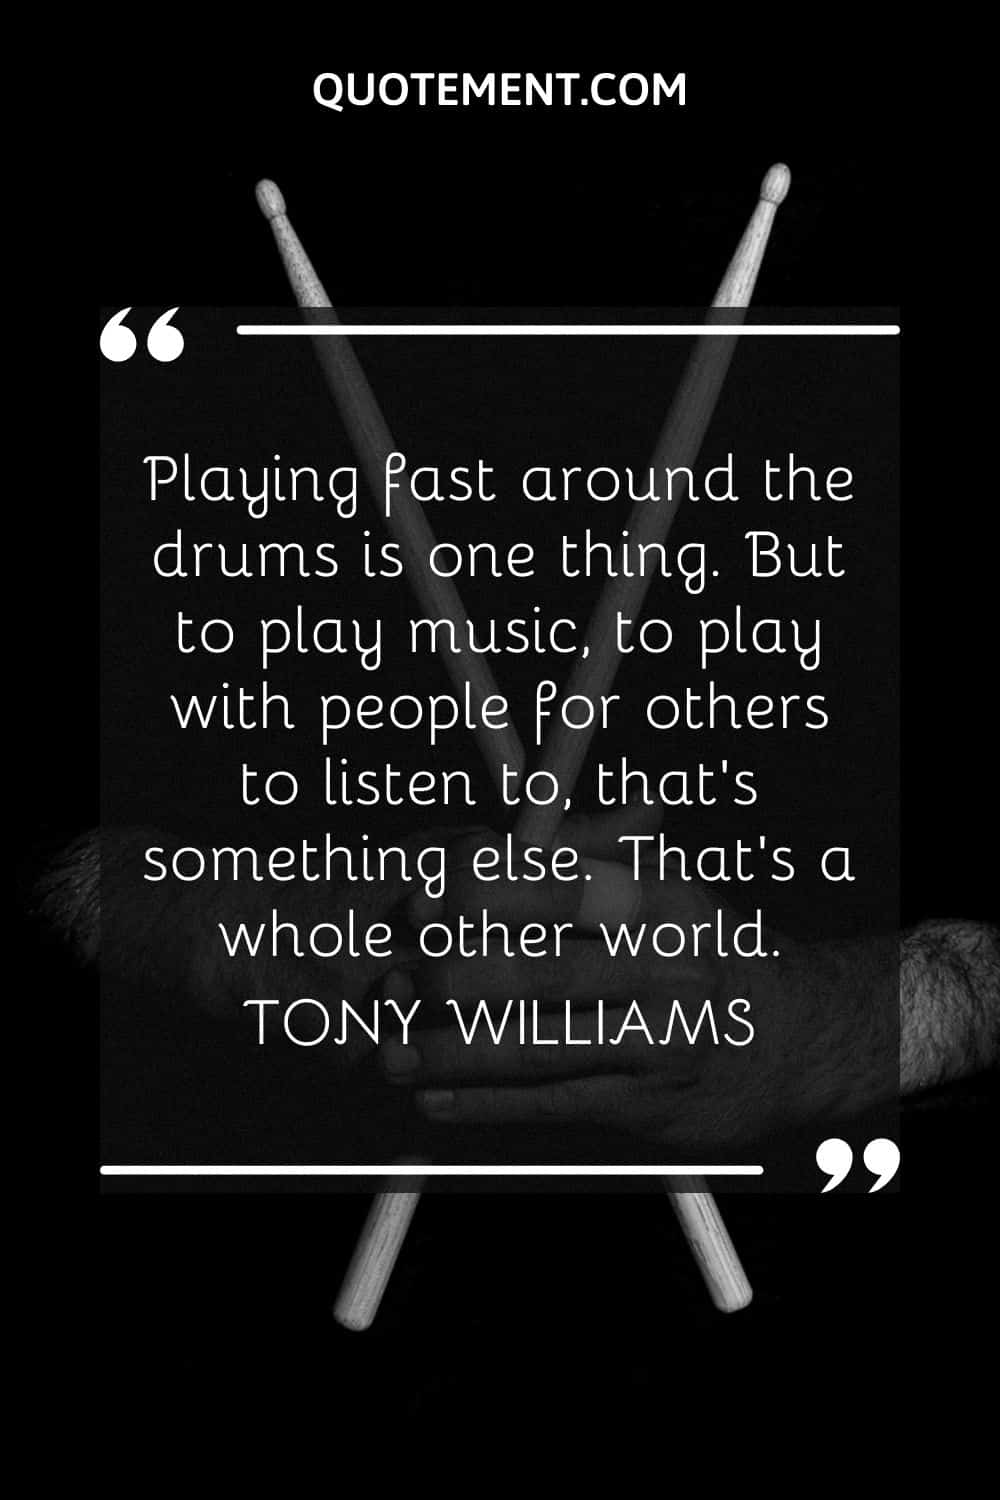 Playing fast around the drums is one thing